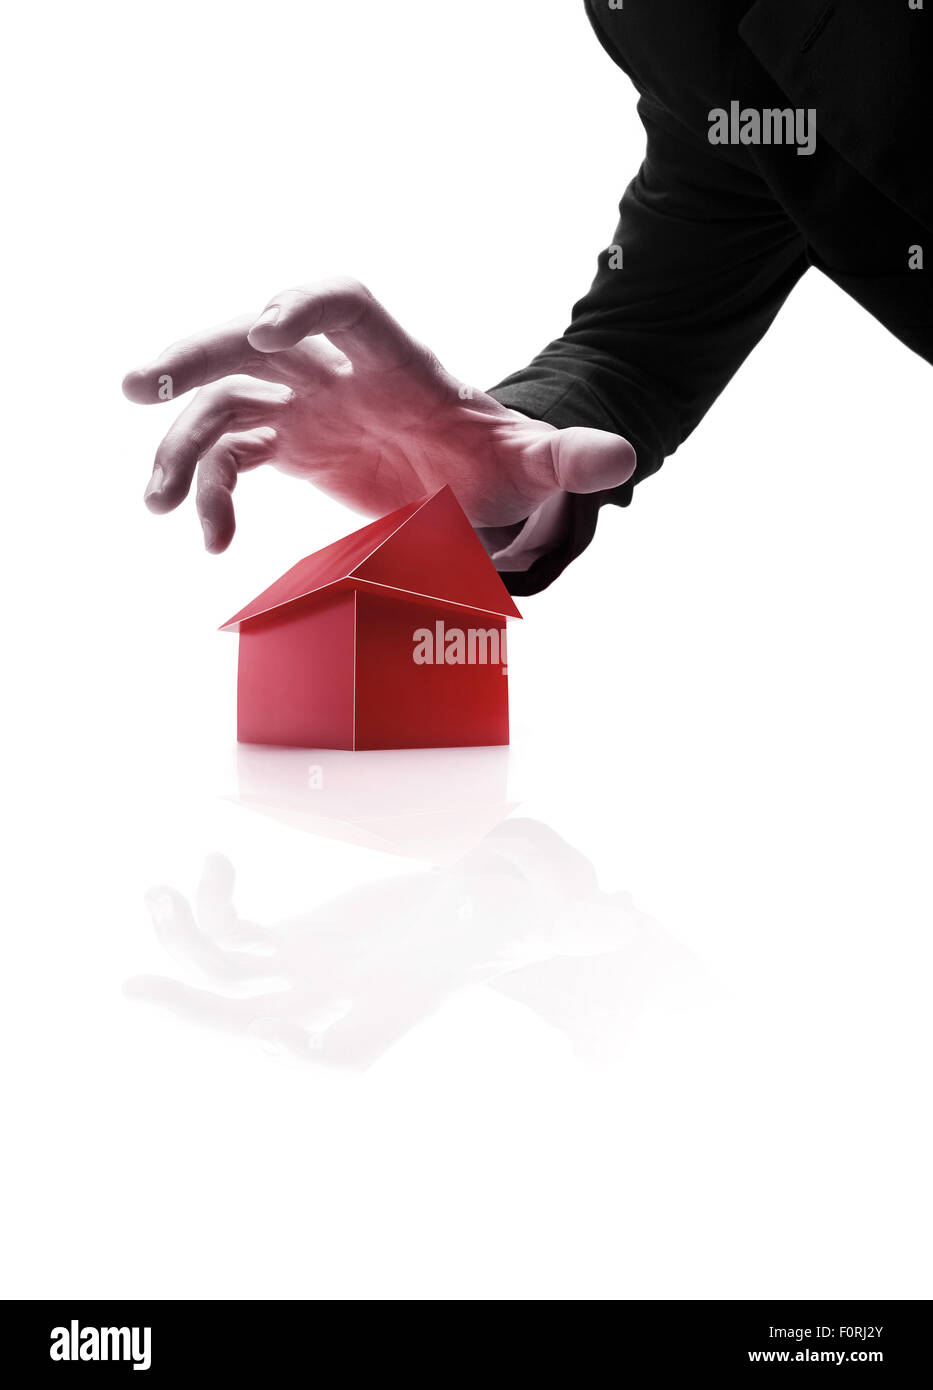 Hand about to take house away. Stock Photo